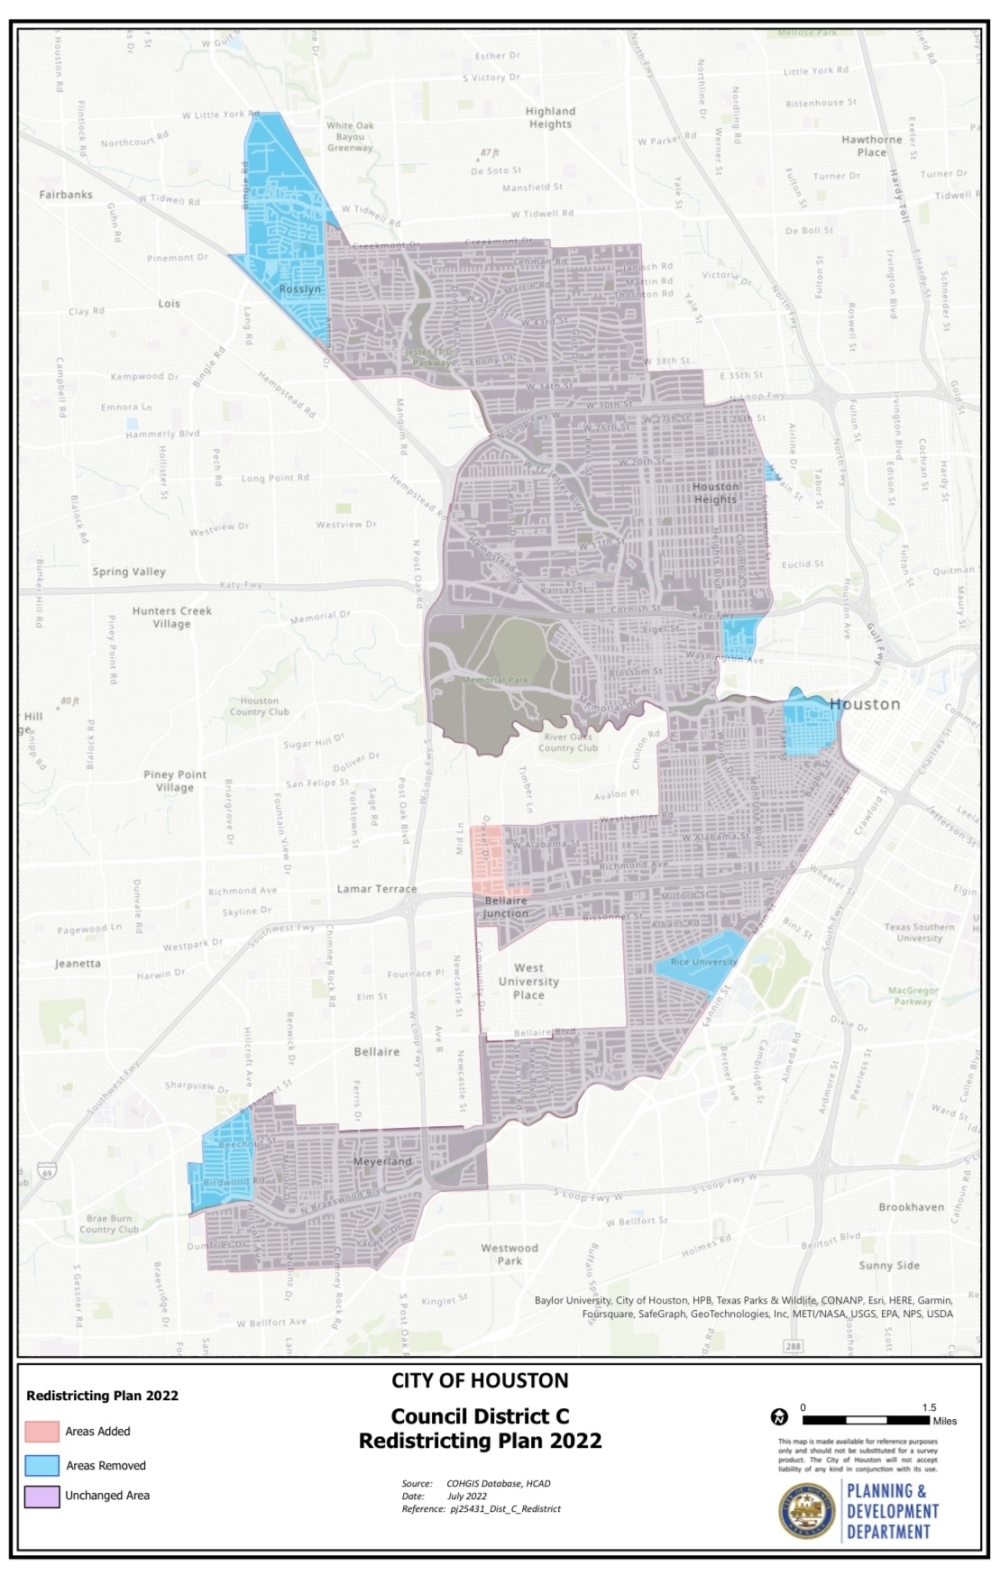 With the overlay map, residents can see which areas of District C are affected by the proposed redistricting plan. (Courtesy city of Houston)